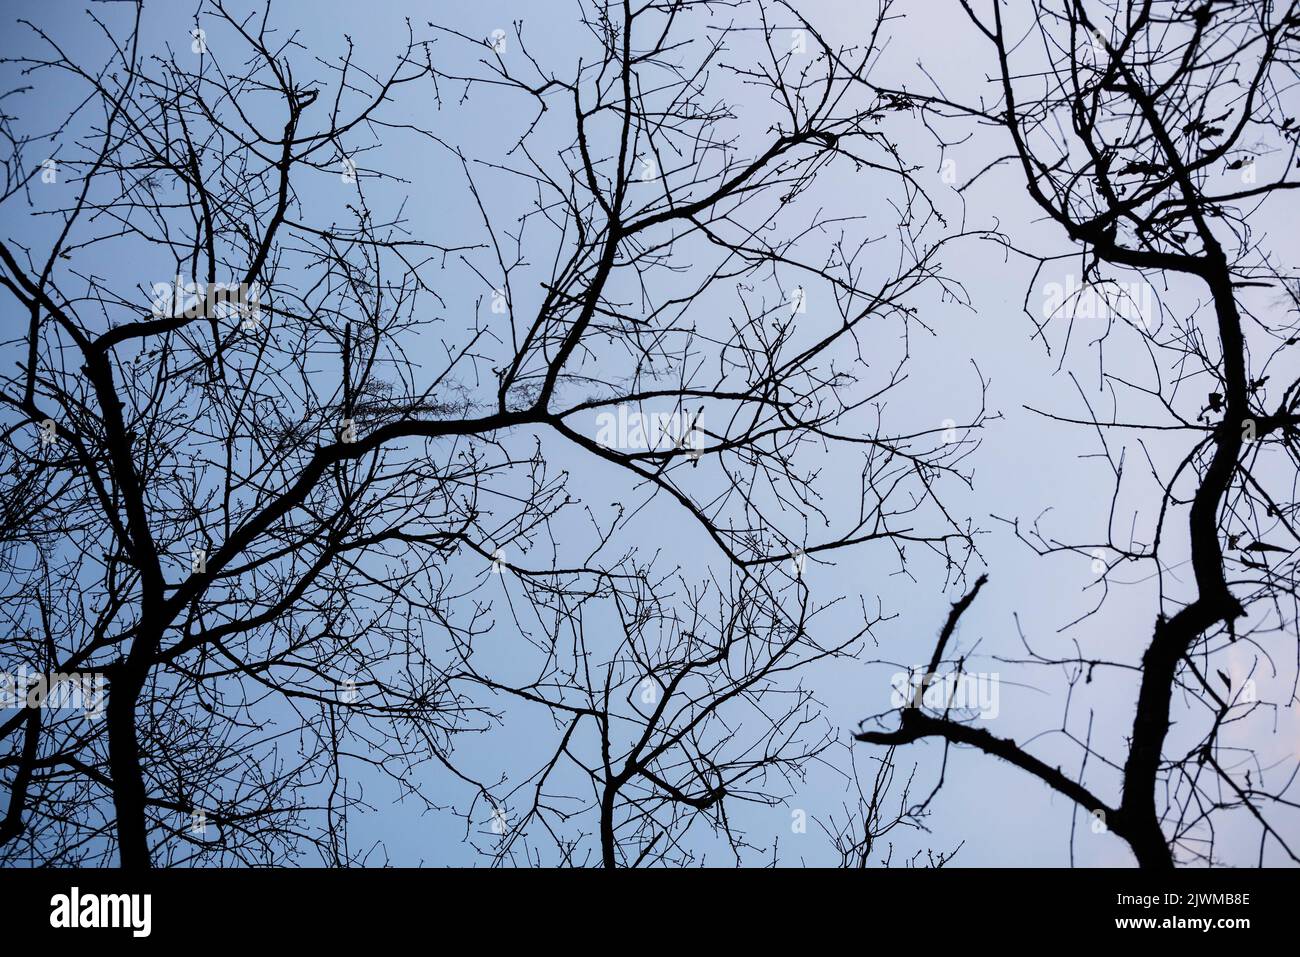 Tree silhouettes in the springtime, just before putting out new Spring growth... Stock Photo